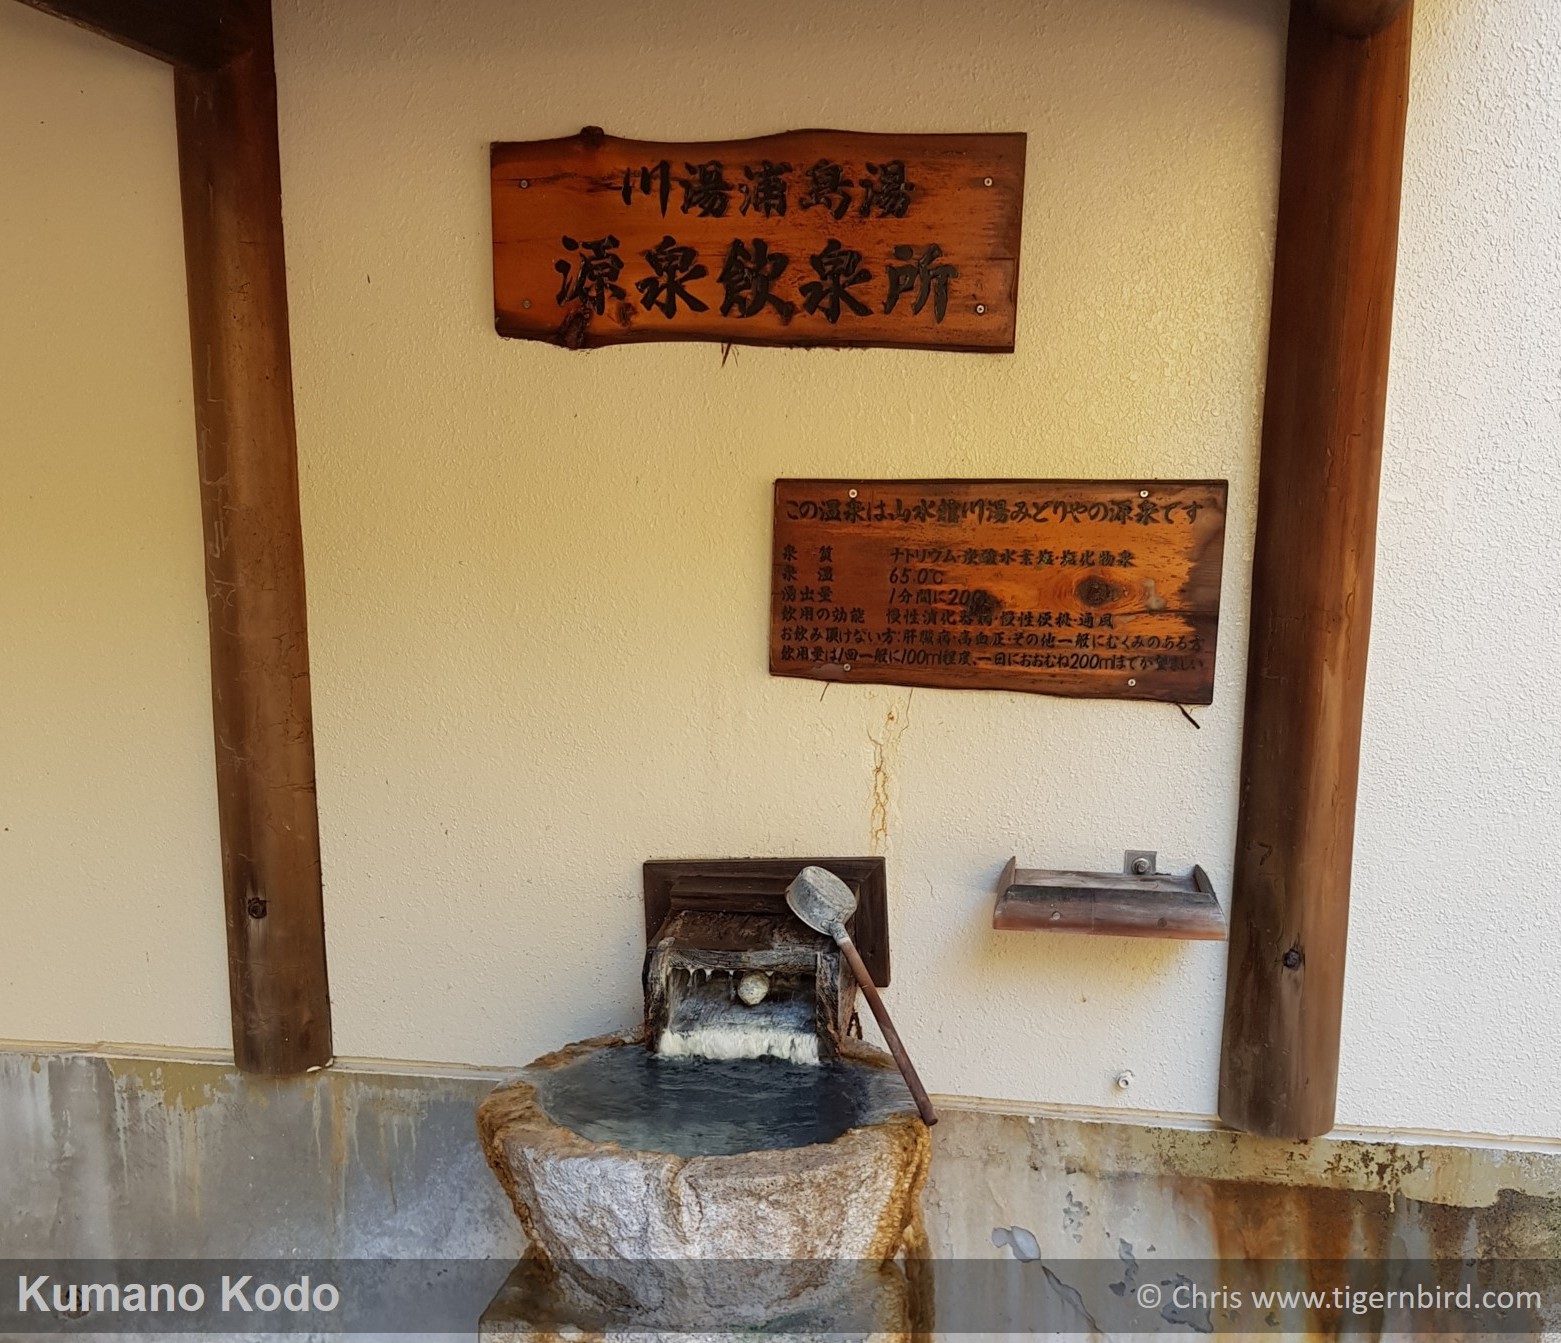 Hot onsen water for visitors to enjoy in Kumano, Japan